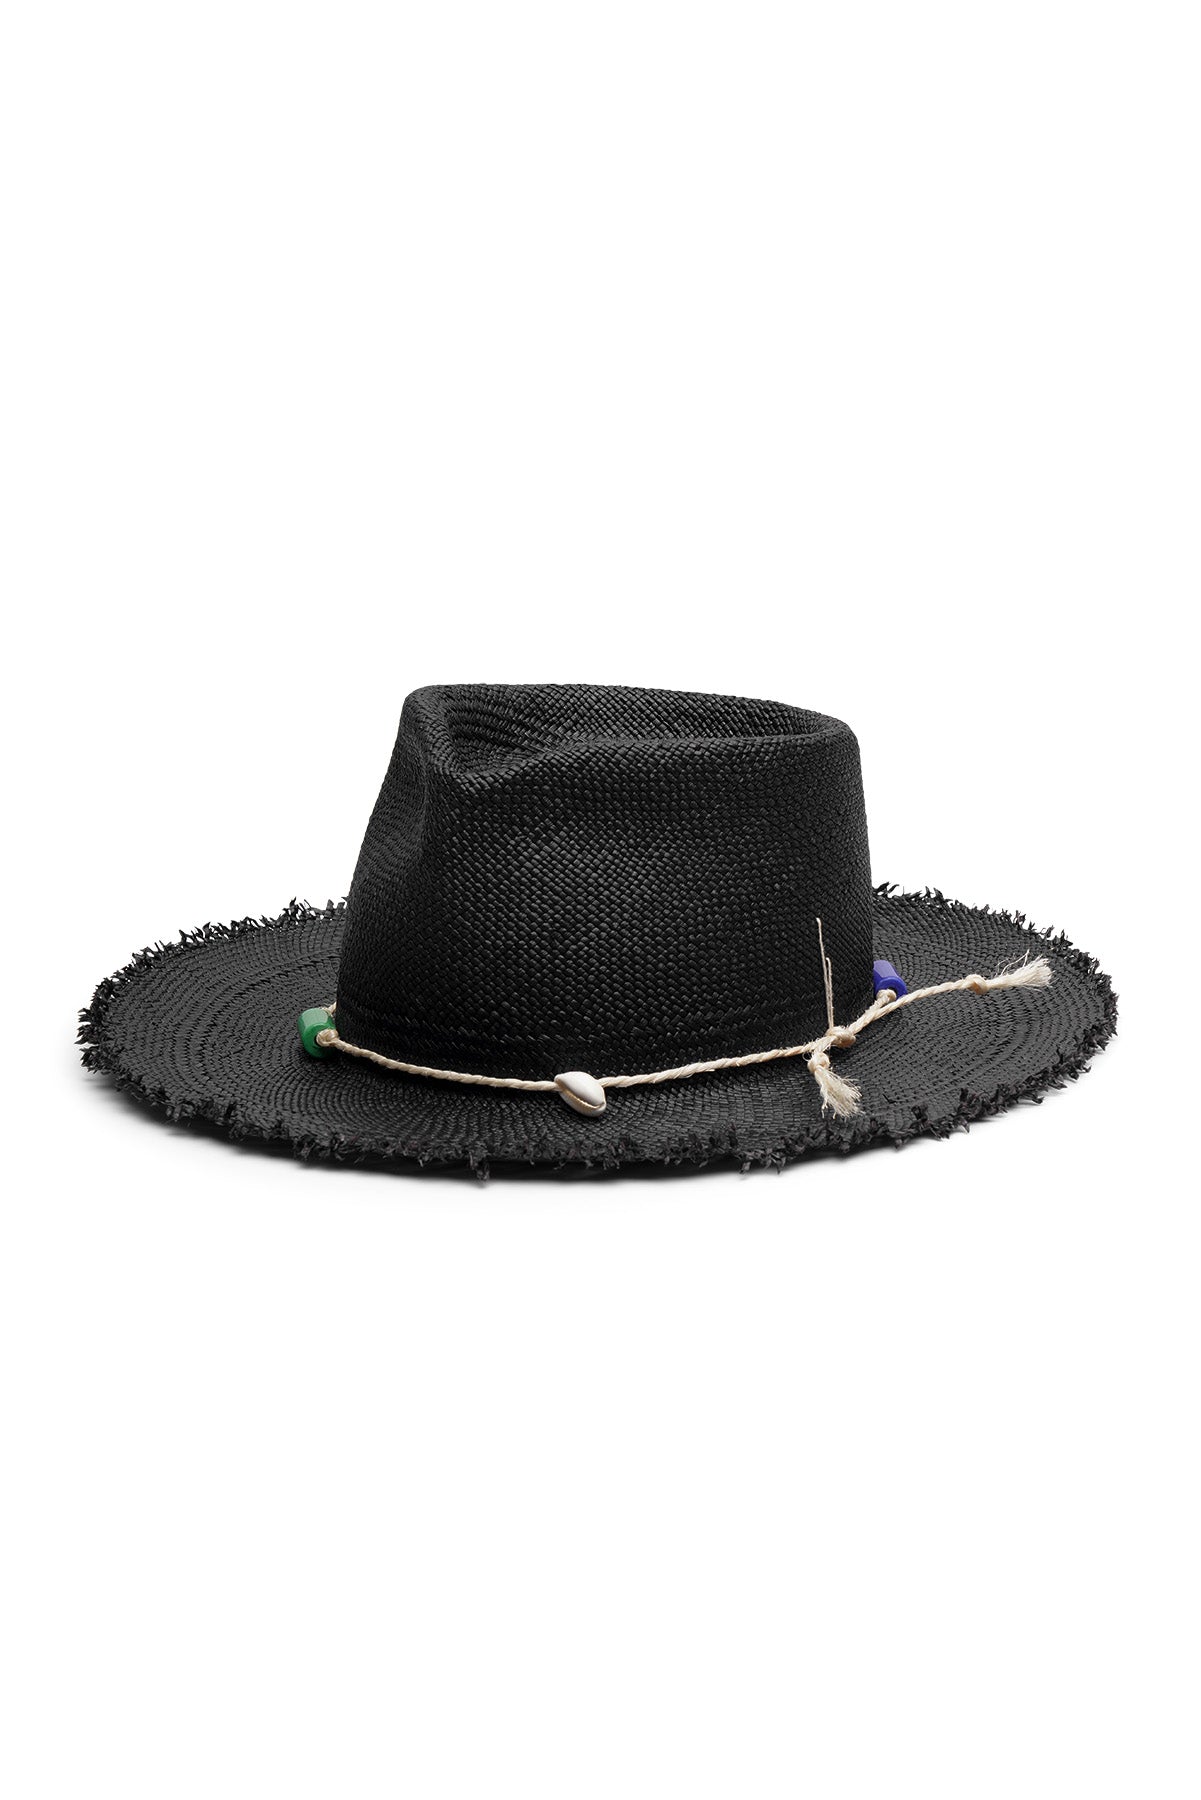 Unisex black straw fedora with wide frayed brim, teardrop crease, tied rope, beads, and seashell detail, handcrafted by SoonNoon in Stockholm